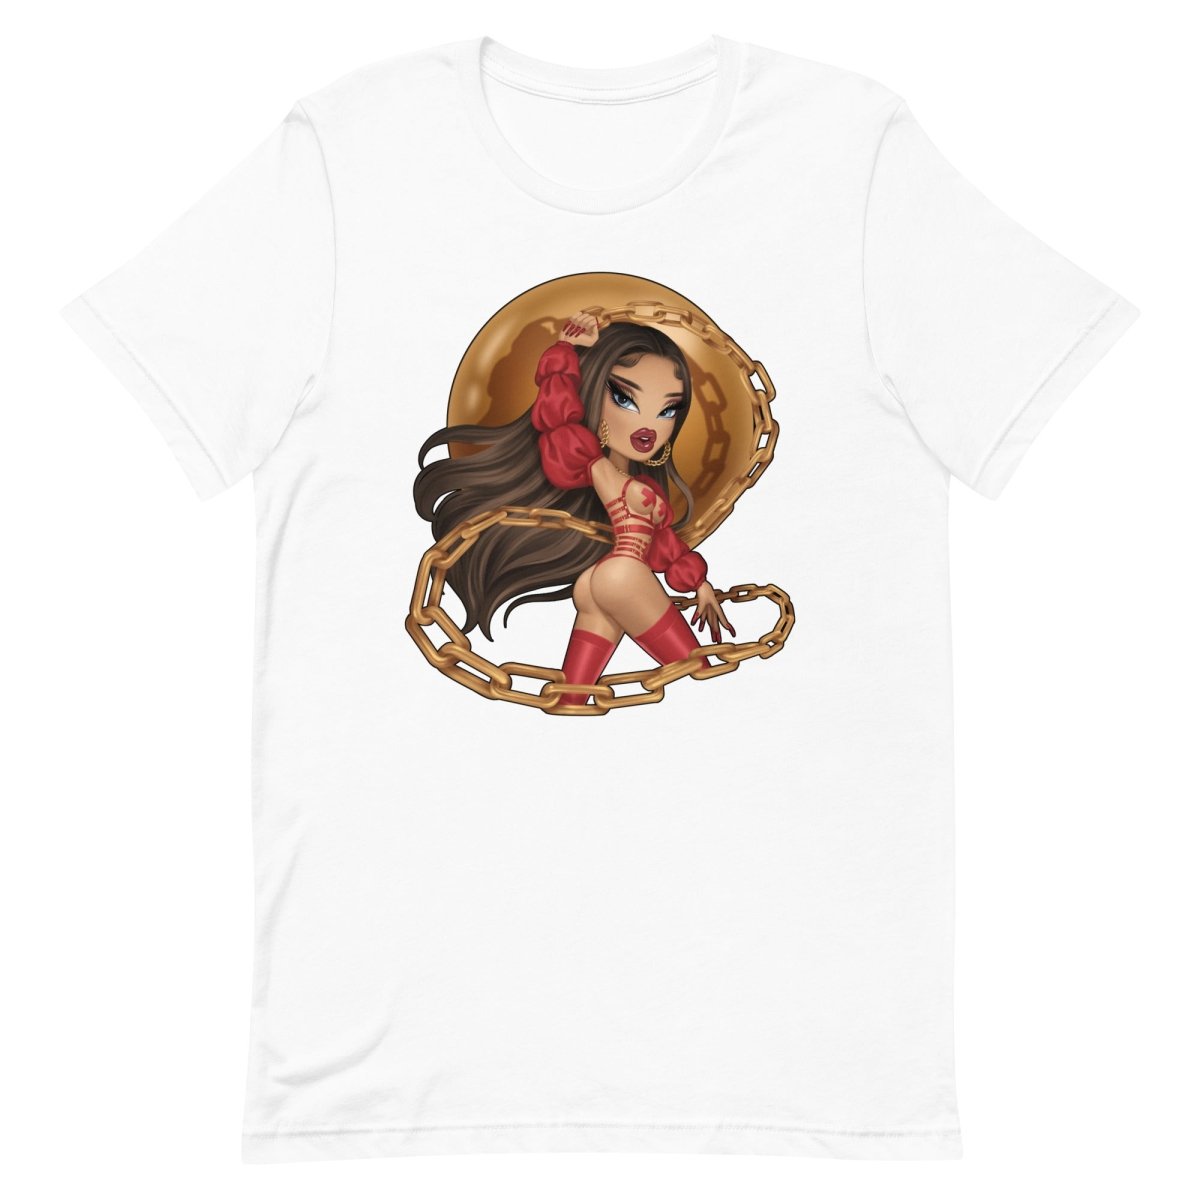 M!SS JADE SO - Power Top na Bratzy T-Shirt - dragqueenmerch